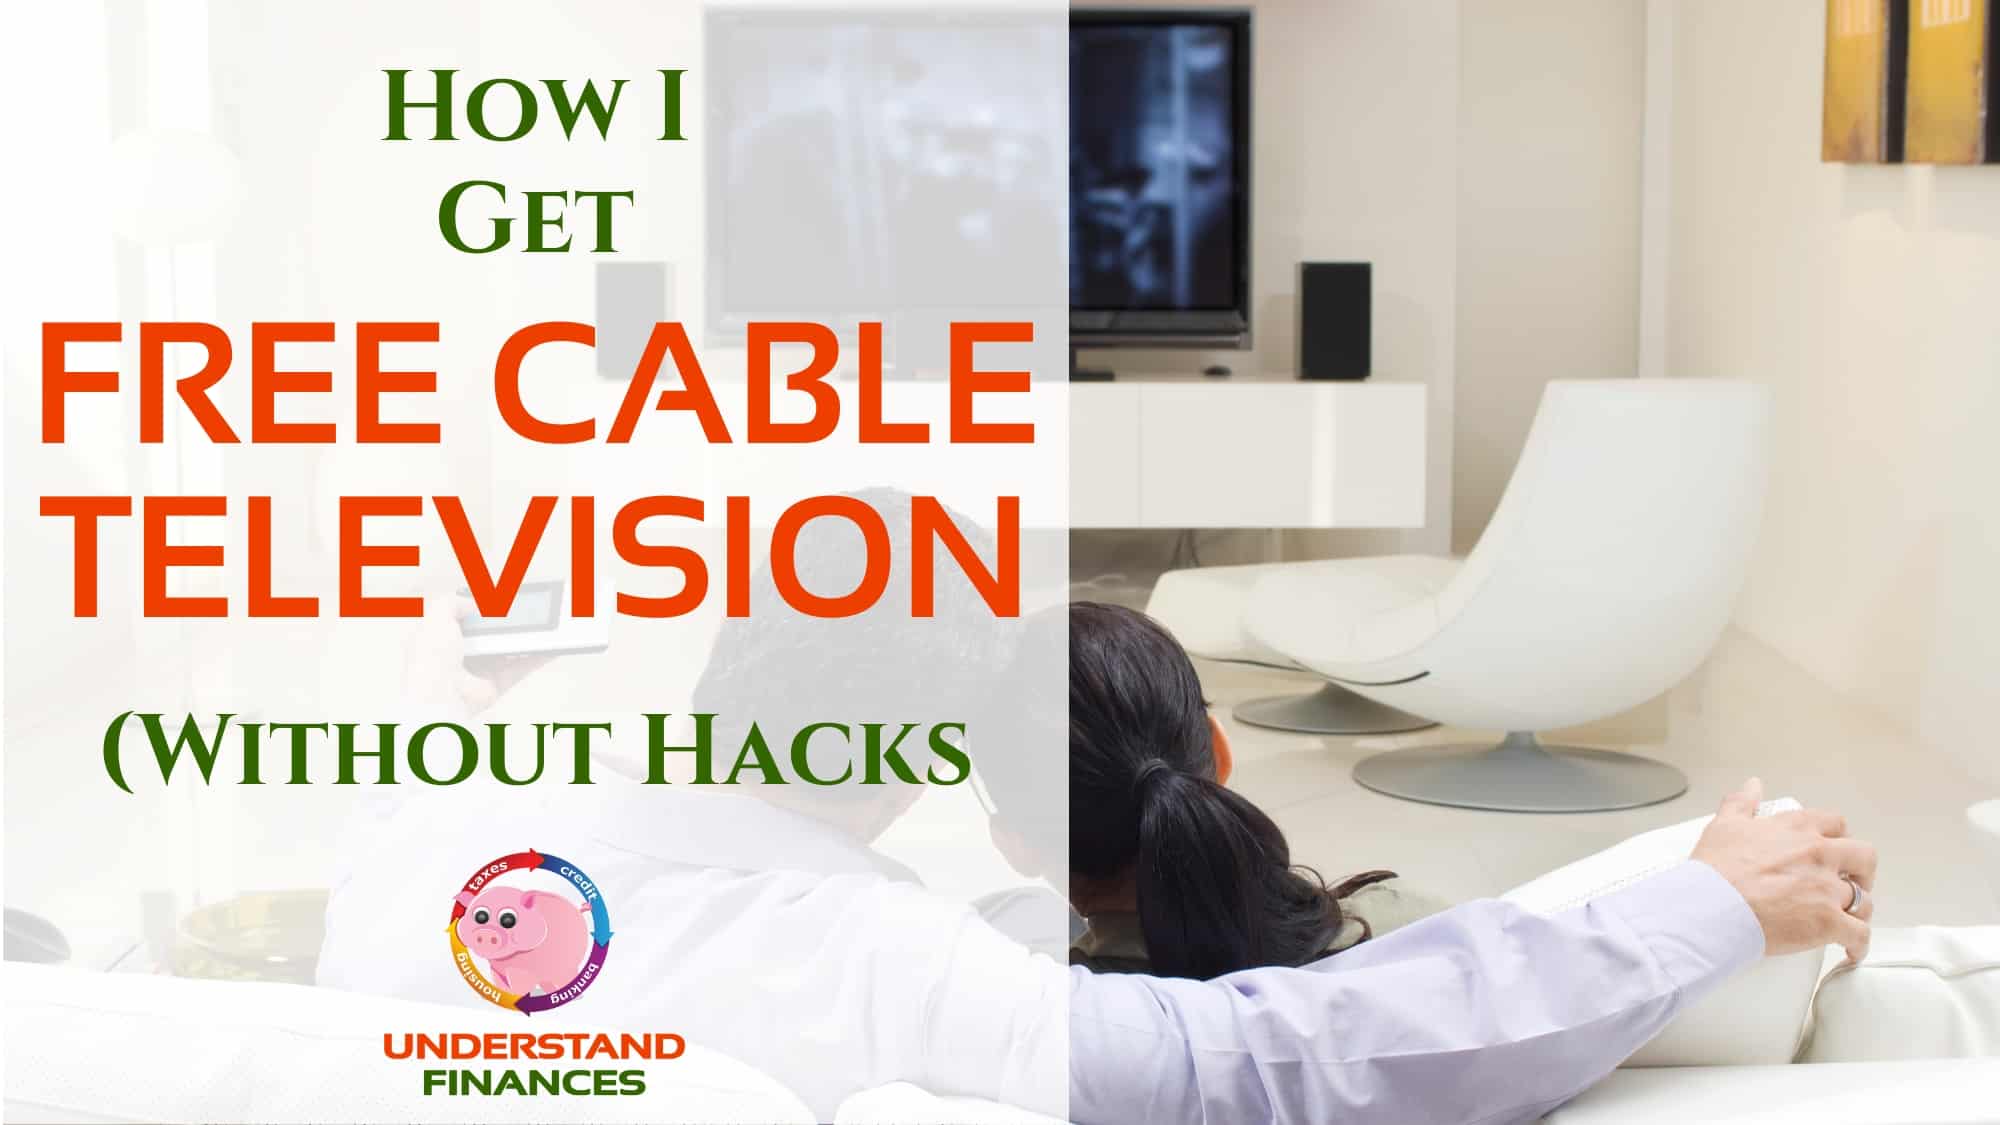 How I Get Free Cable Television (Without Hacks)